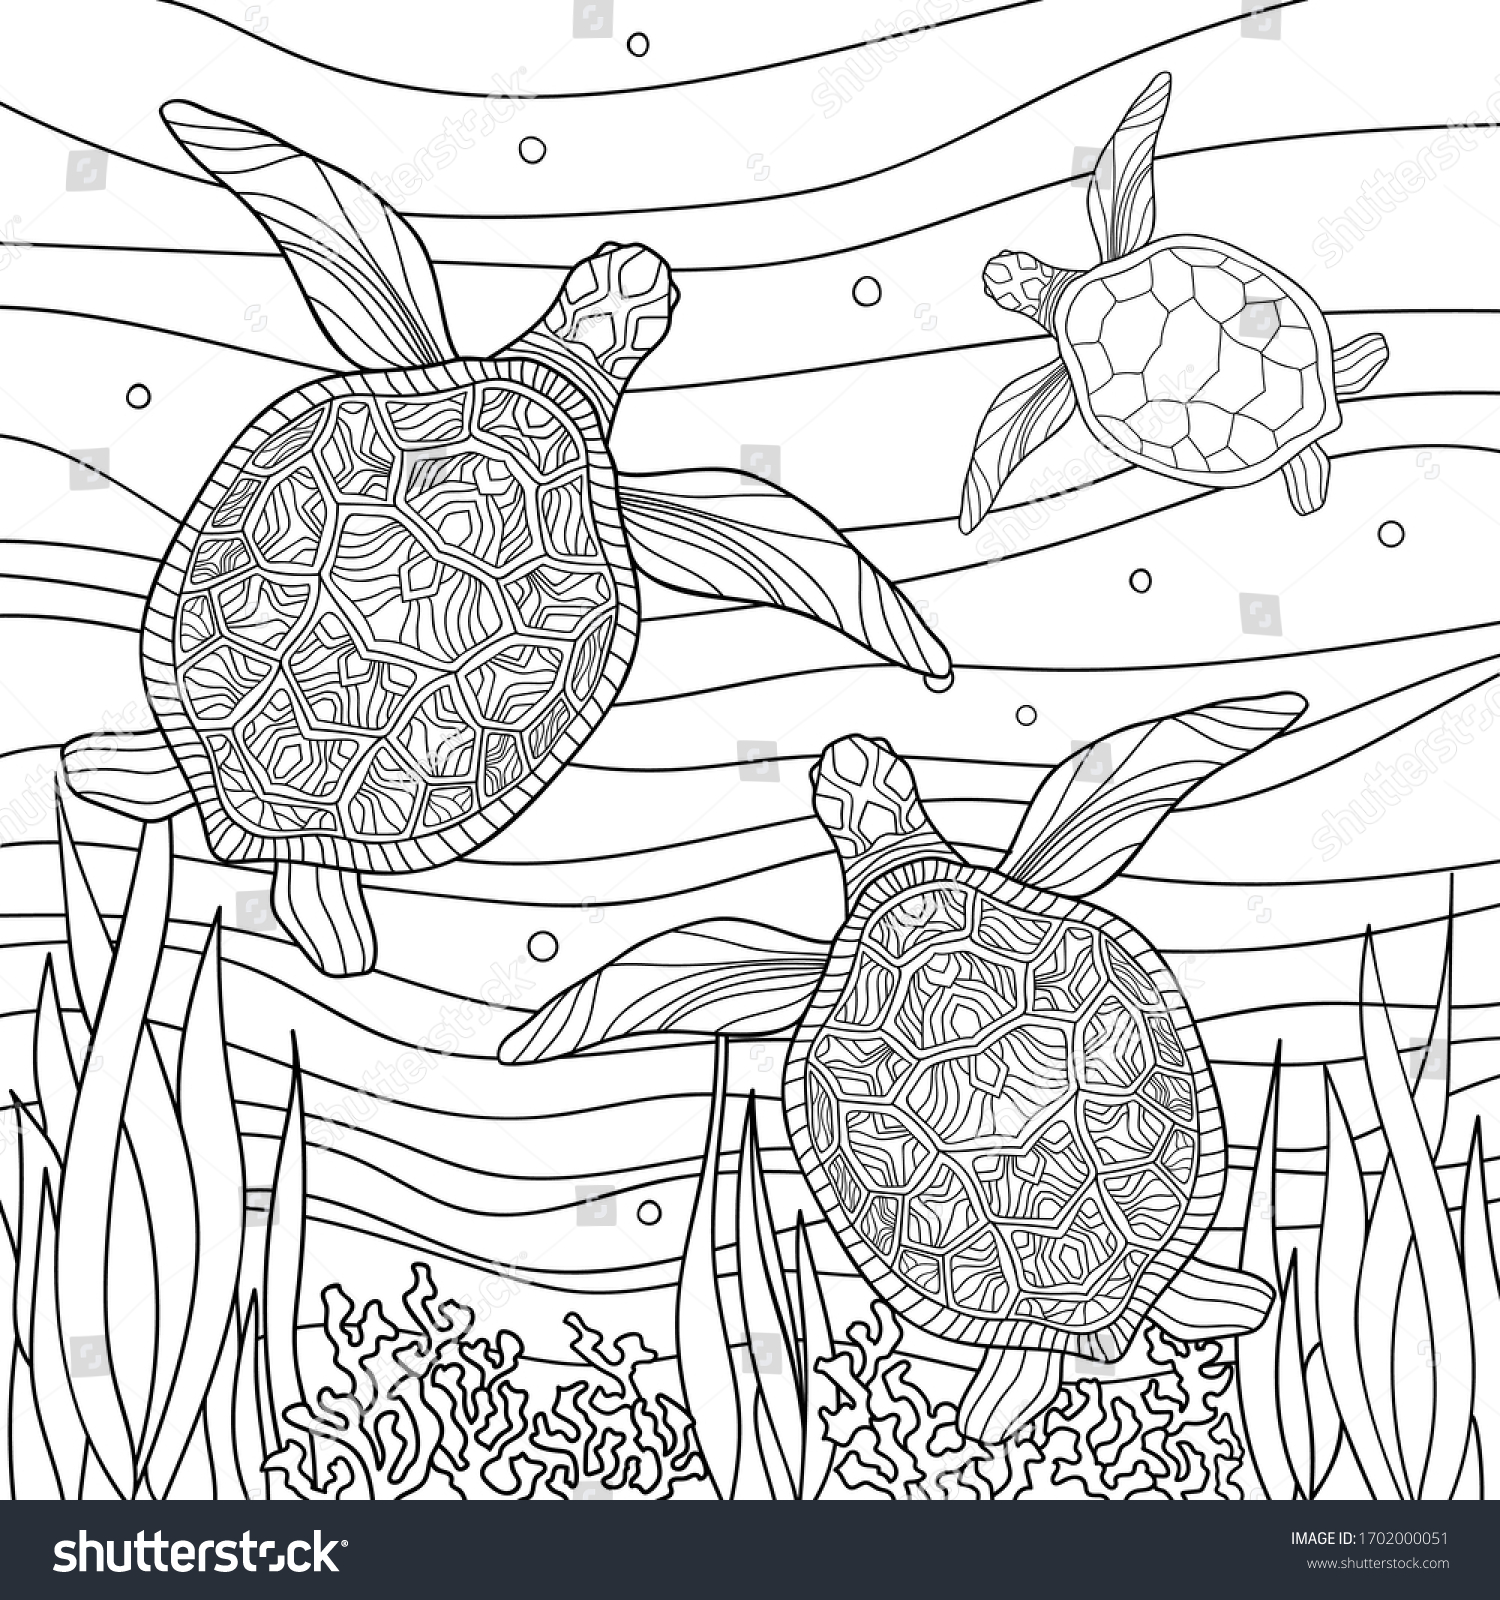 SVG of Family of turtles with small patterns in underwater world with corals and algae on white isolated background. Sea hand drawn illustration. For kids and adults coloring book pages. svg